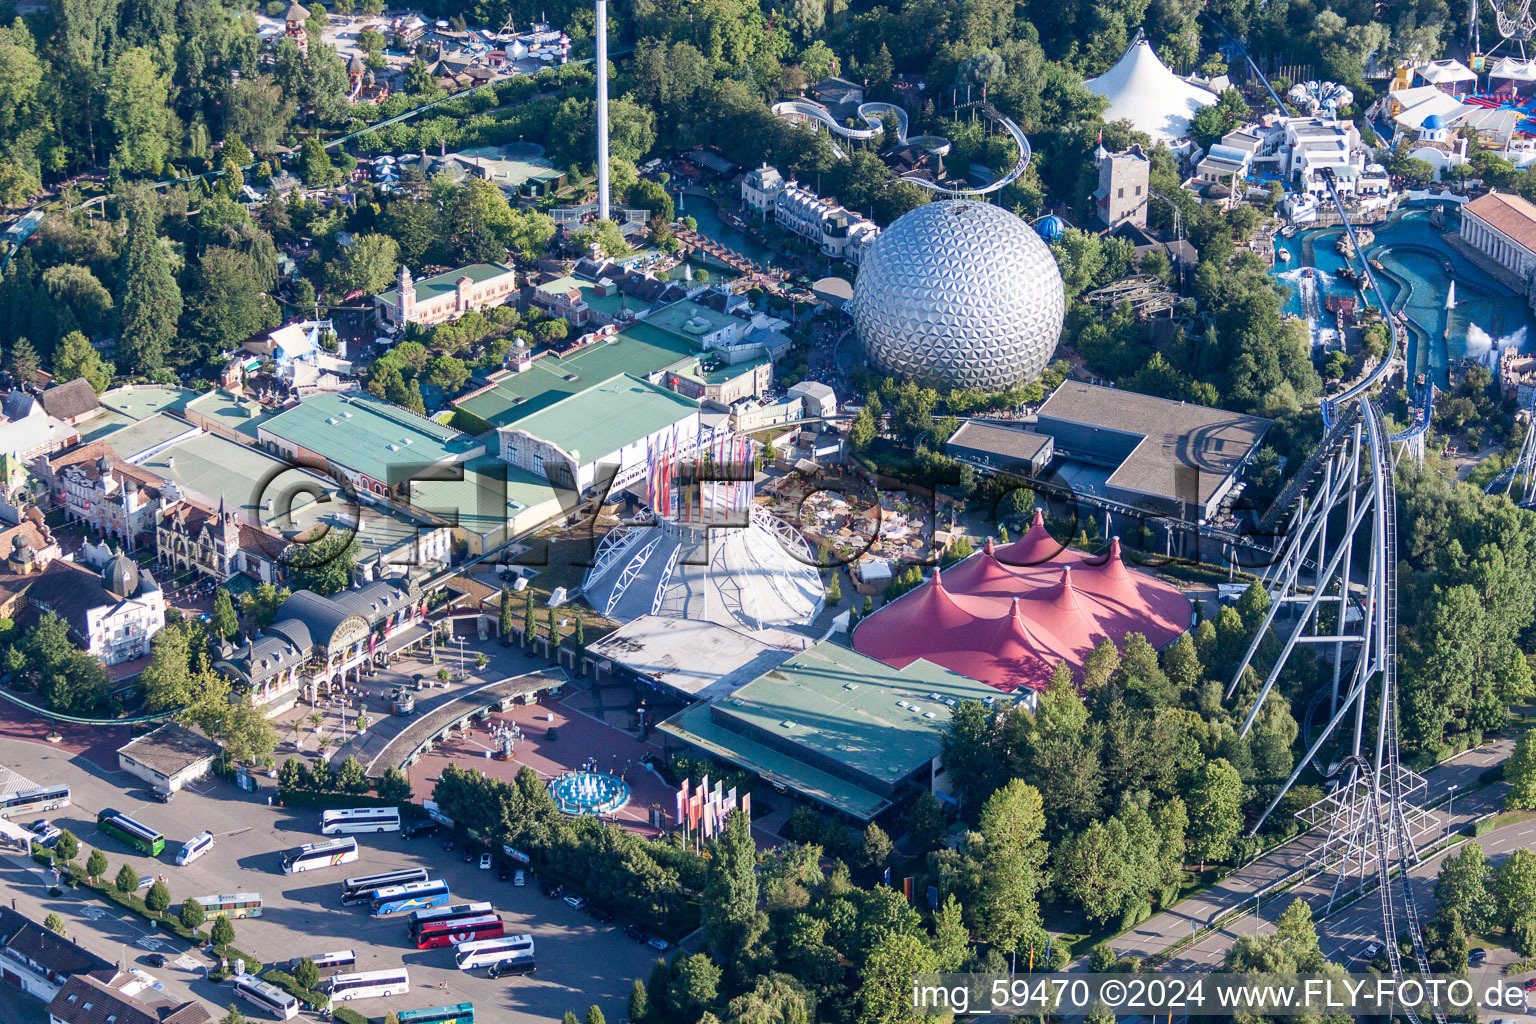 Leisure Centre - Amusement Park Europa-Park in Rust in the state Baden-Wurttemberg, Germany from above